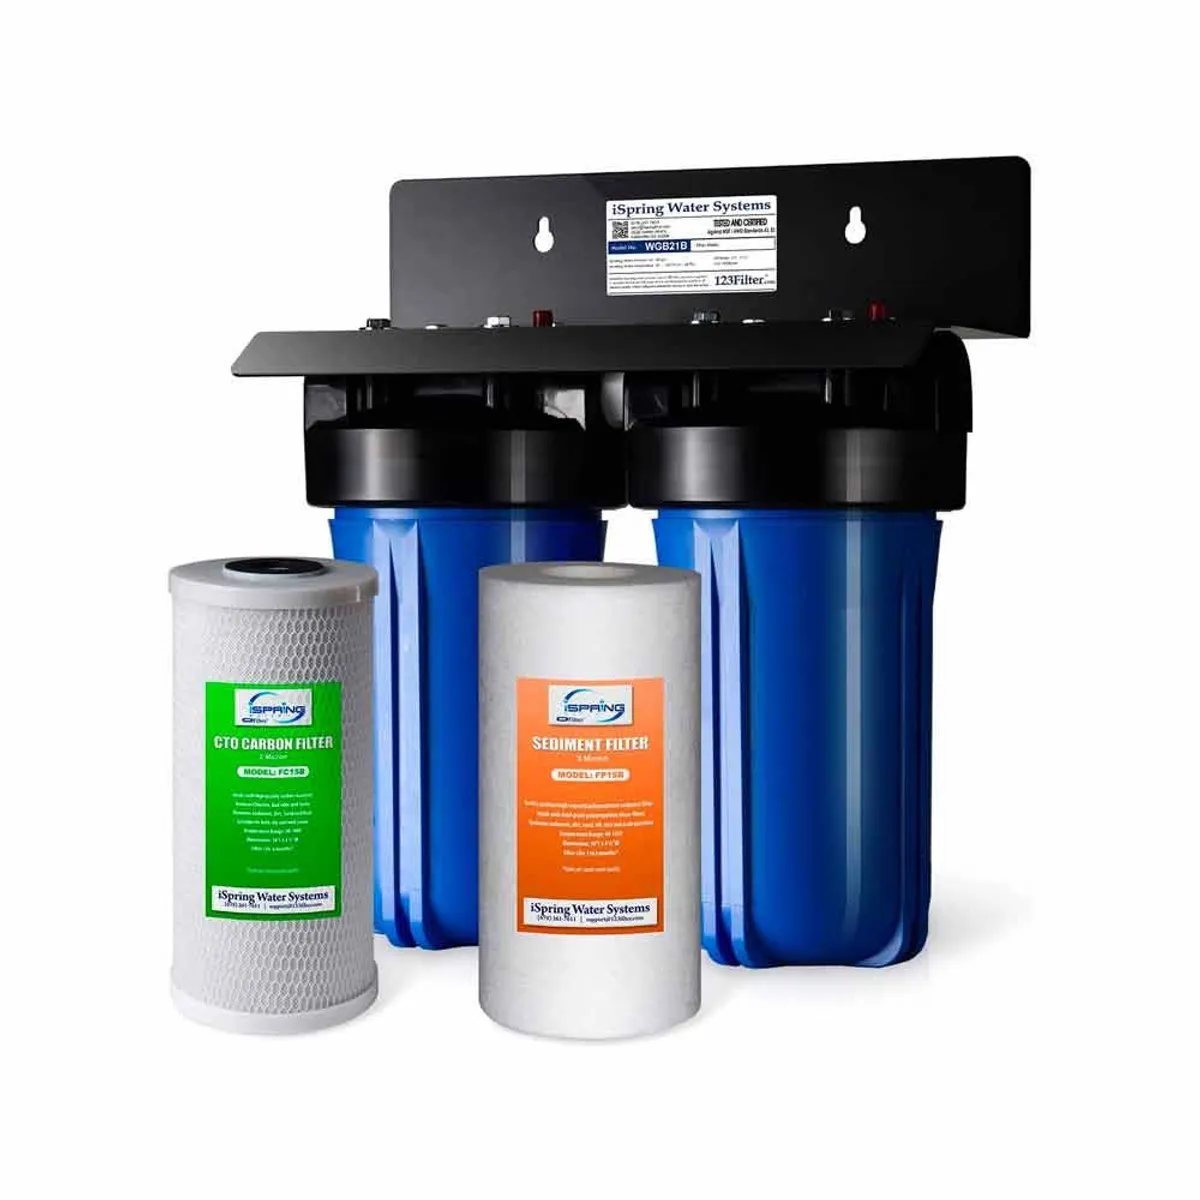 iSpring WGB21B 2-Stage Whole House Water Filtration System